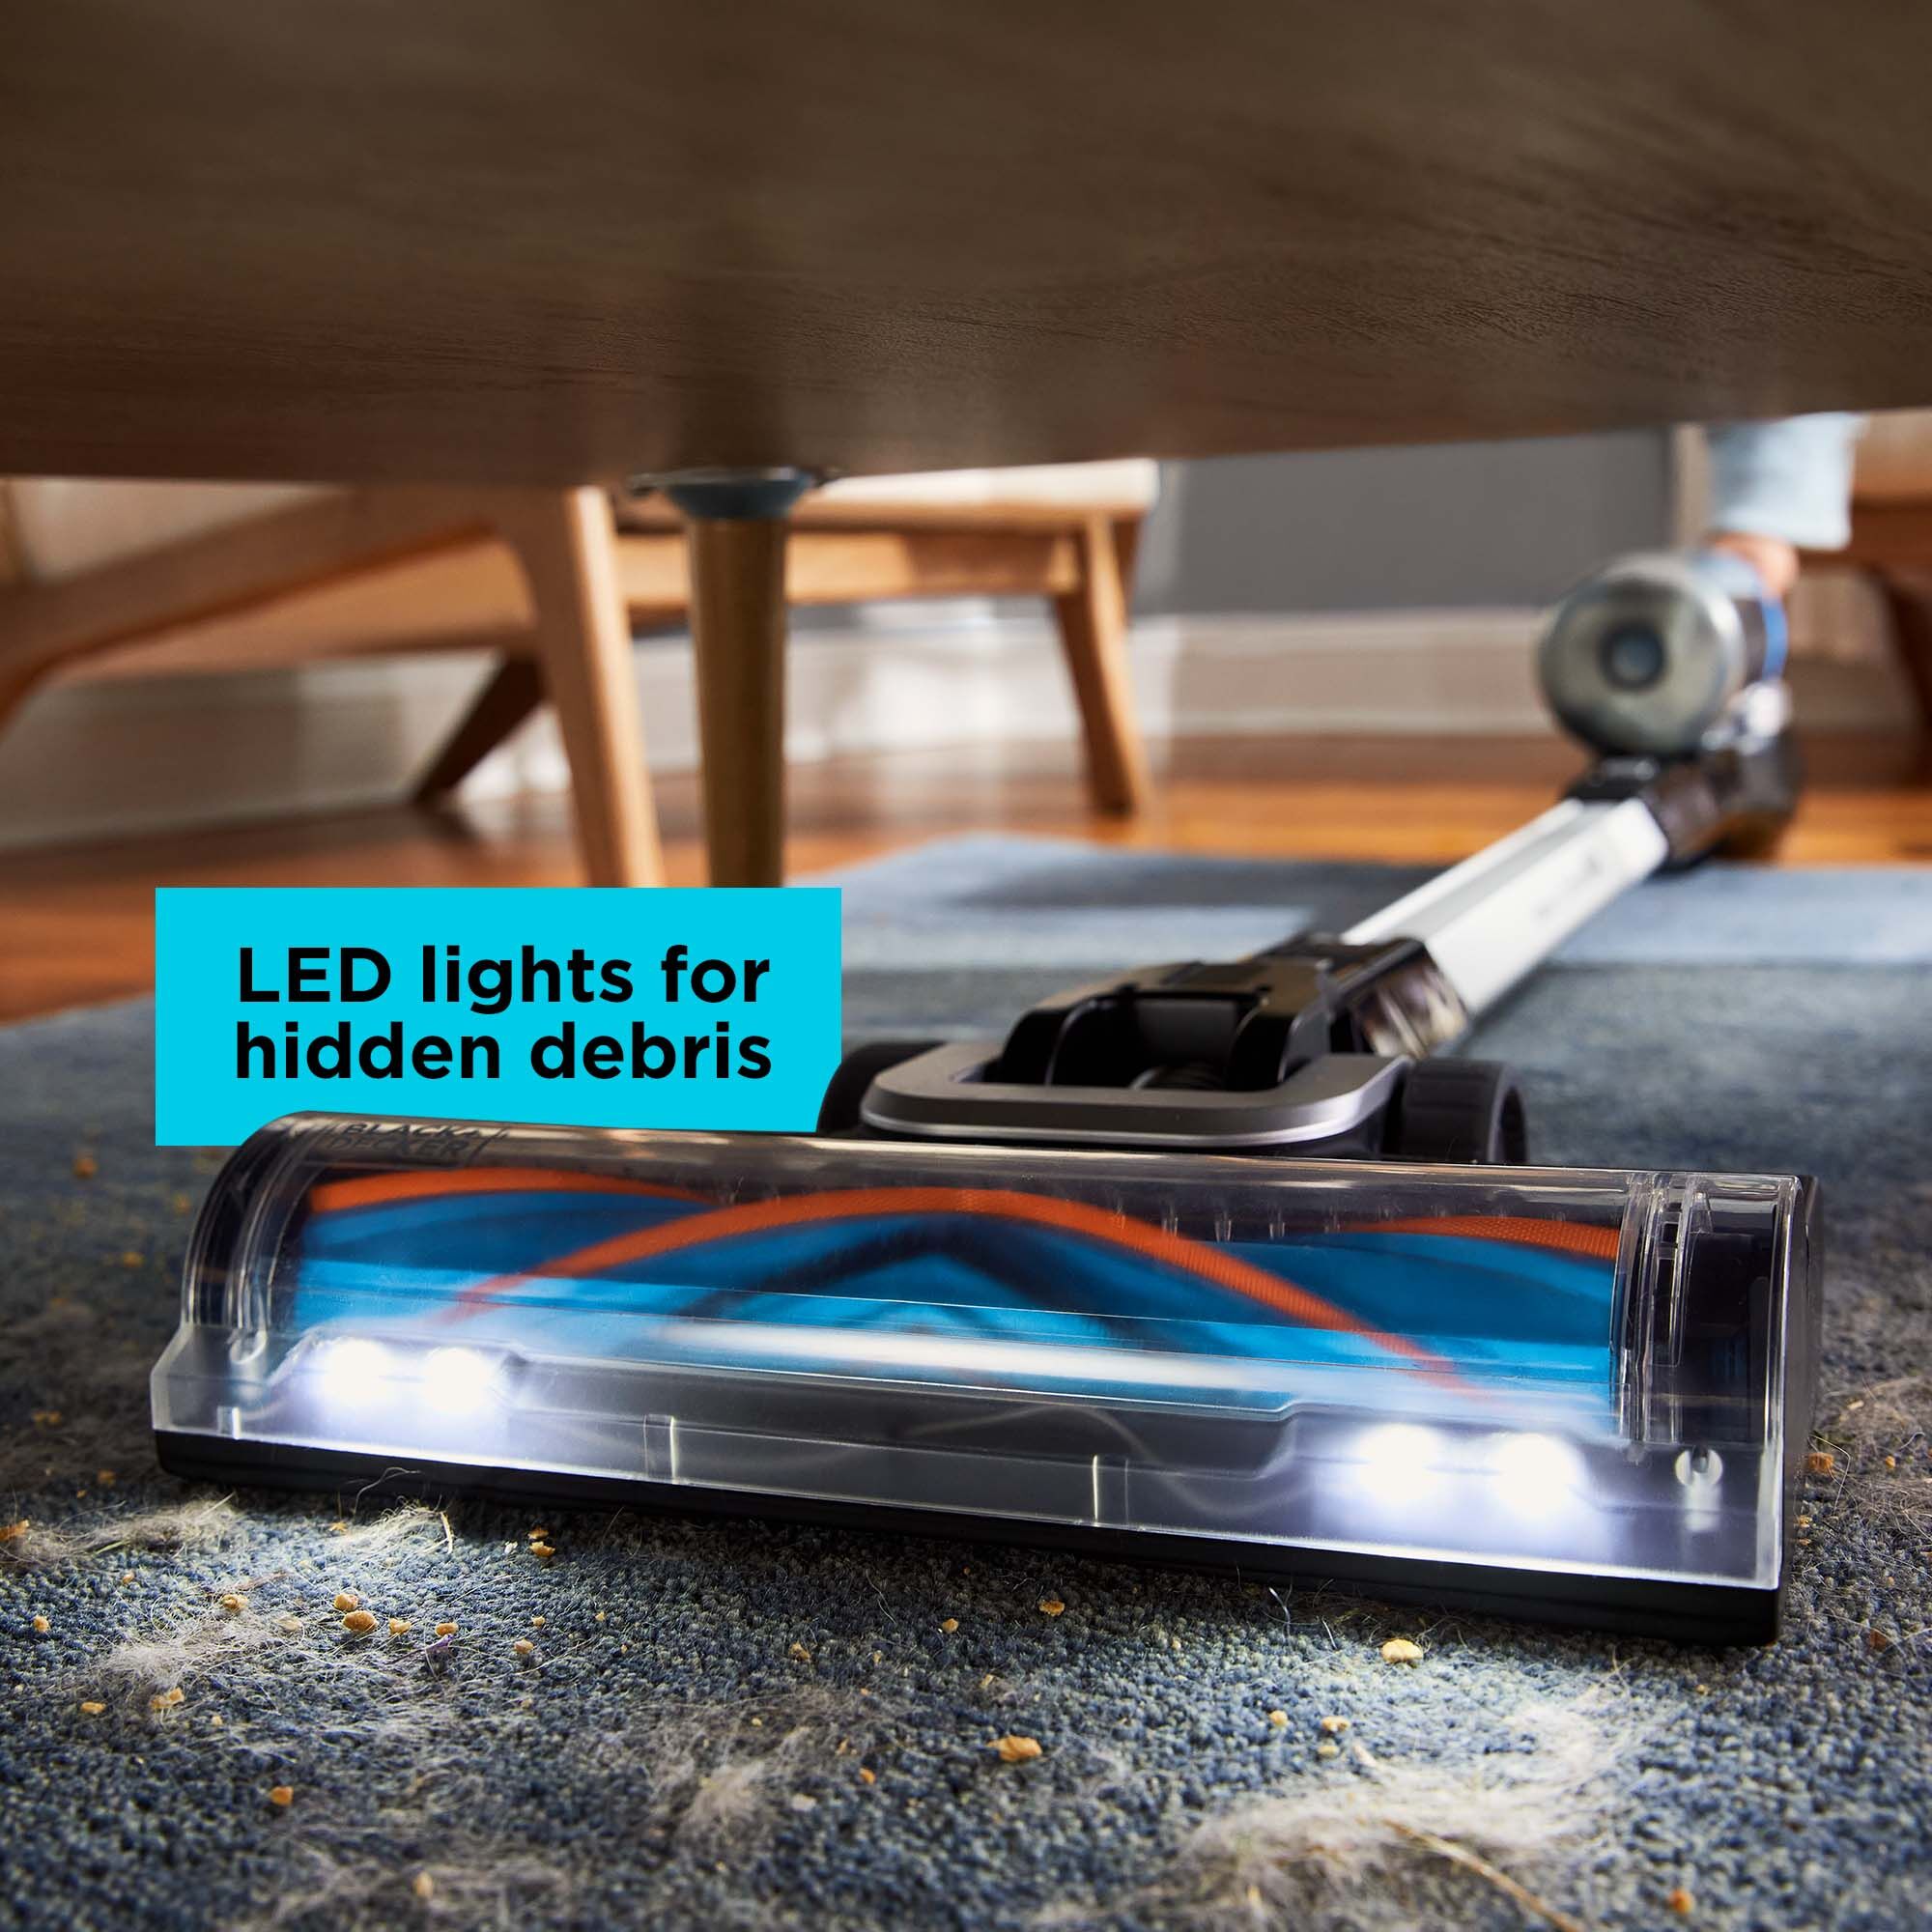 POWERSERIES Extreme MAX stick vac vacuuming under a table with the LED lights illuminating debris